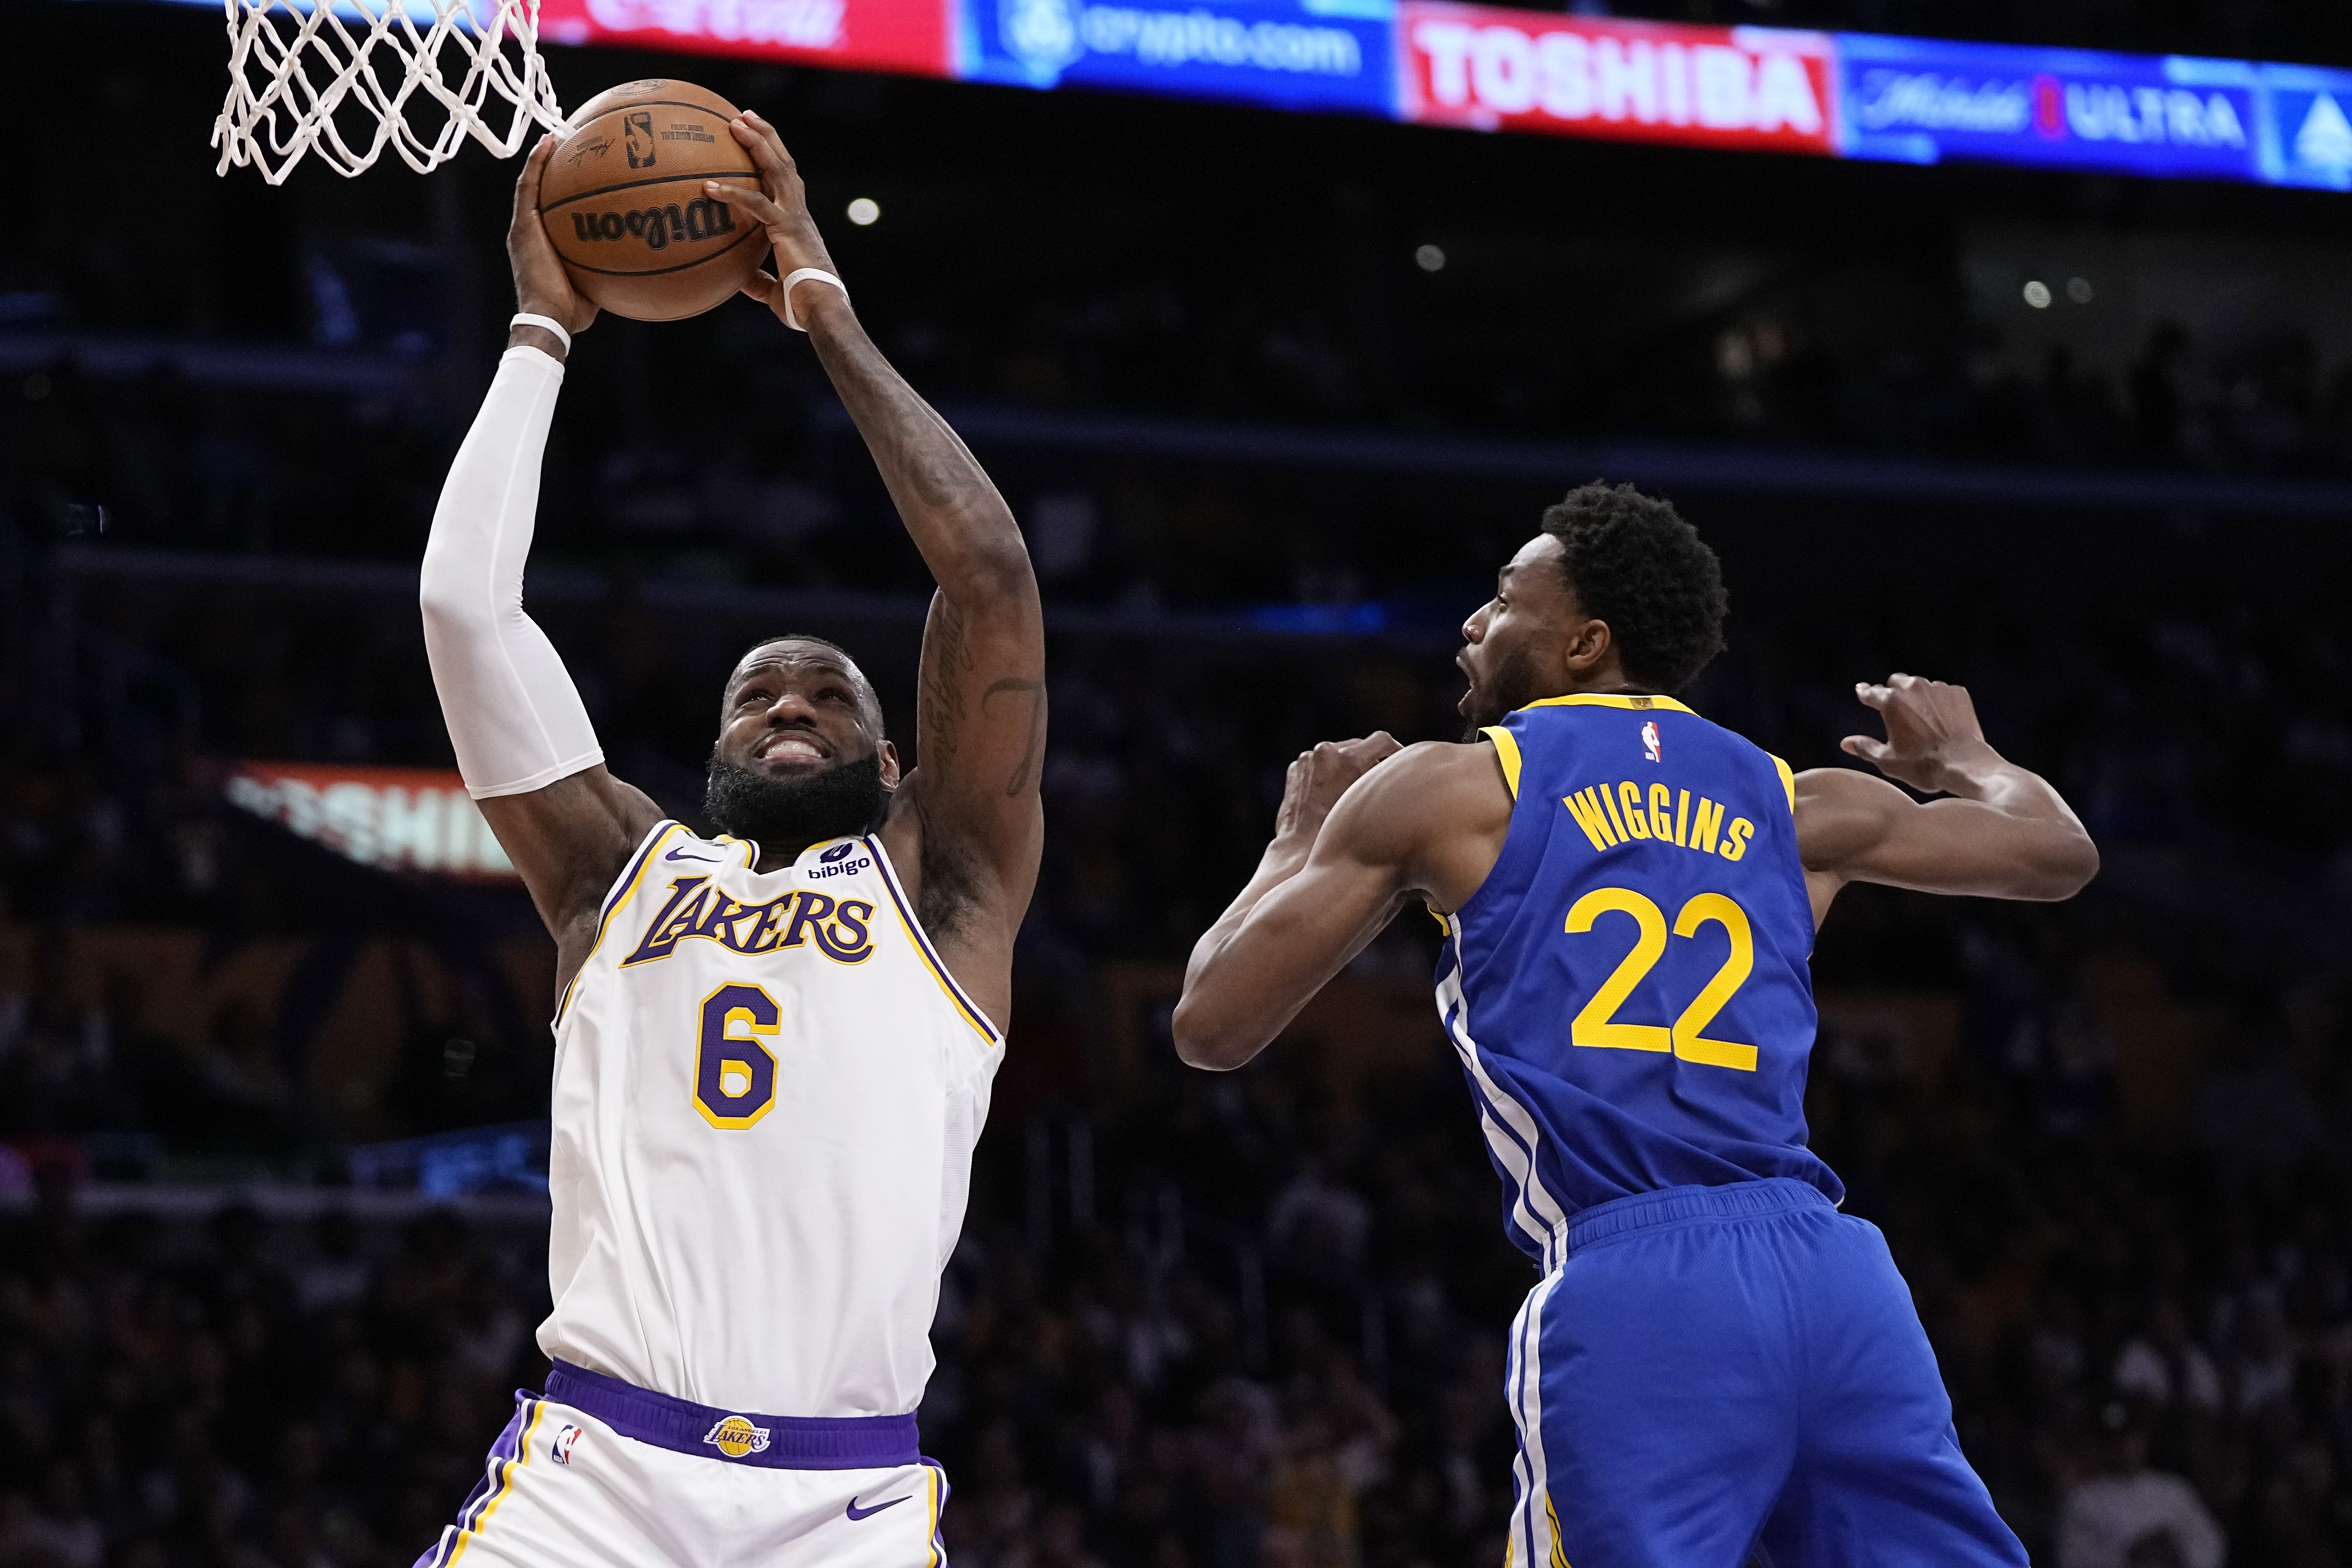 Warriors vs. Lakers Western Conference Semifinals Game 2 Player